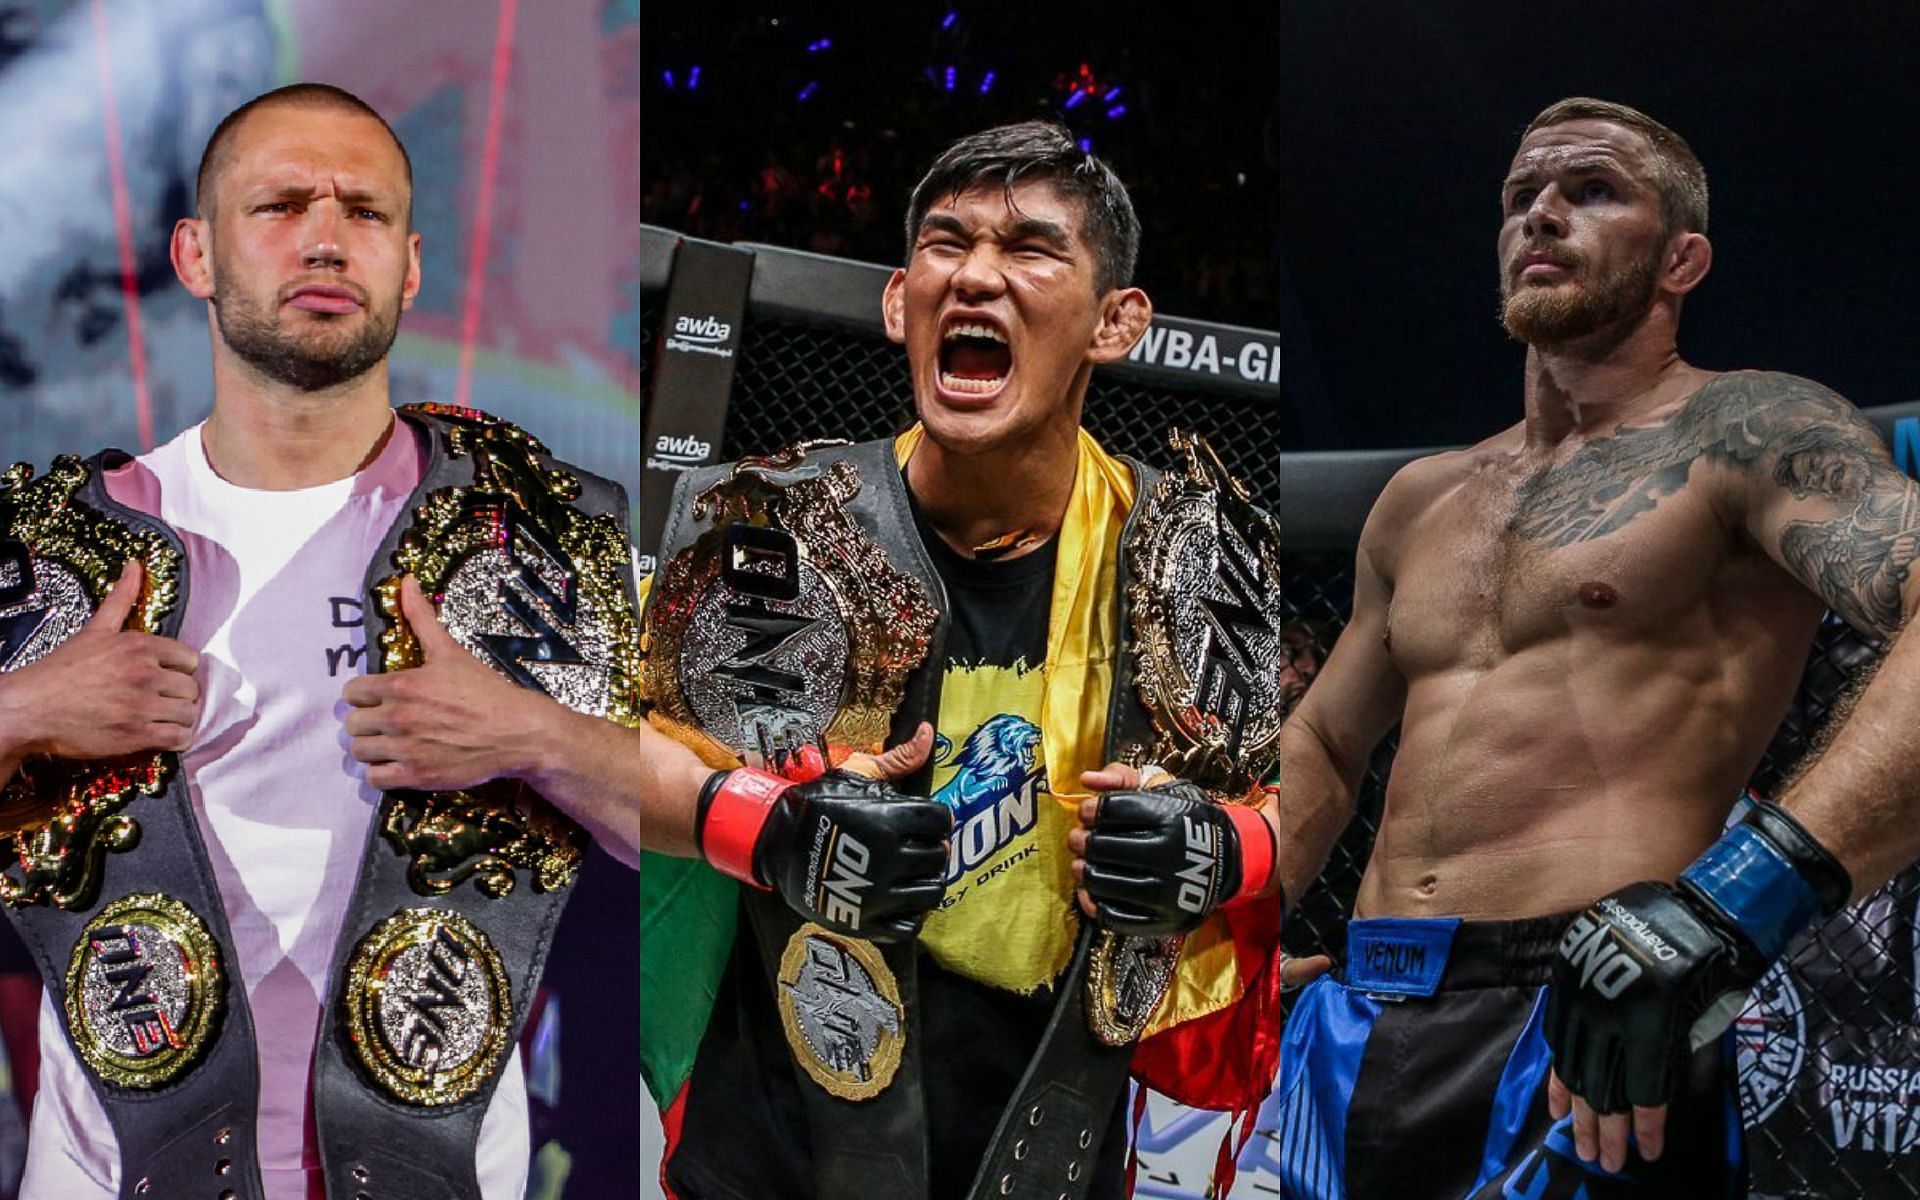 Aung La N Sang (center) looks forward for the middleweight title clash between Reinier de Ridder (left) and Vitaly Bigdash (right). [Photos ONE Championship]